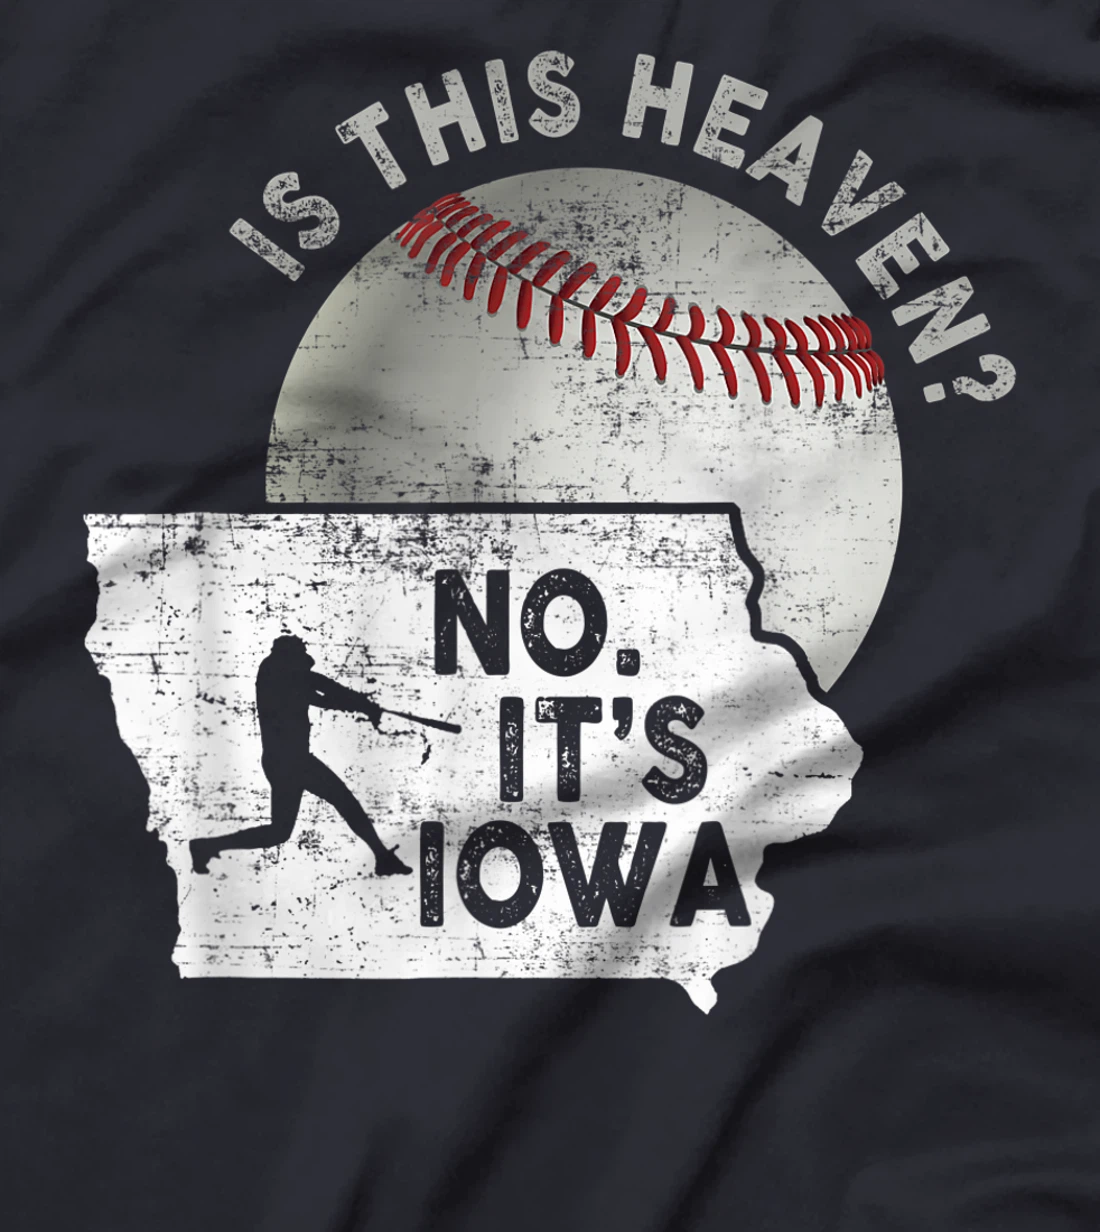 Is This Heaven No It's Iowa Vintage Field Of Baseball Dreams T-Shirt Size S-3XL